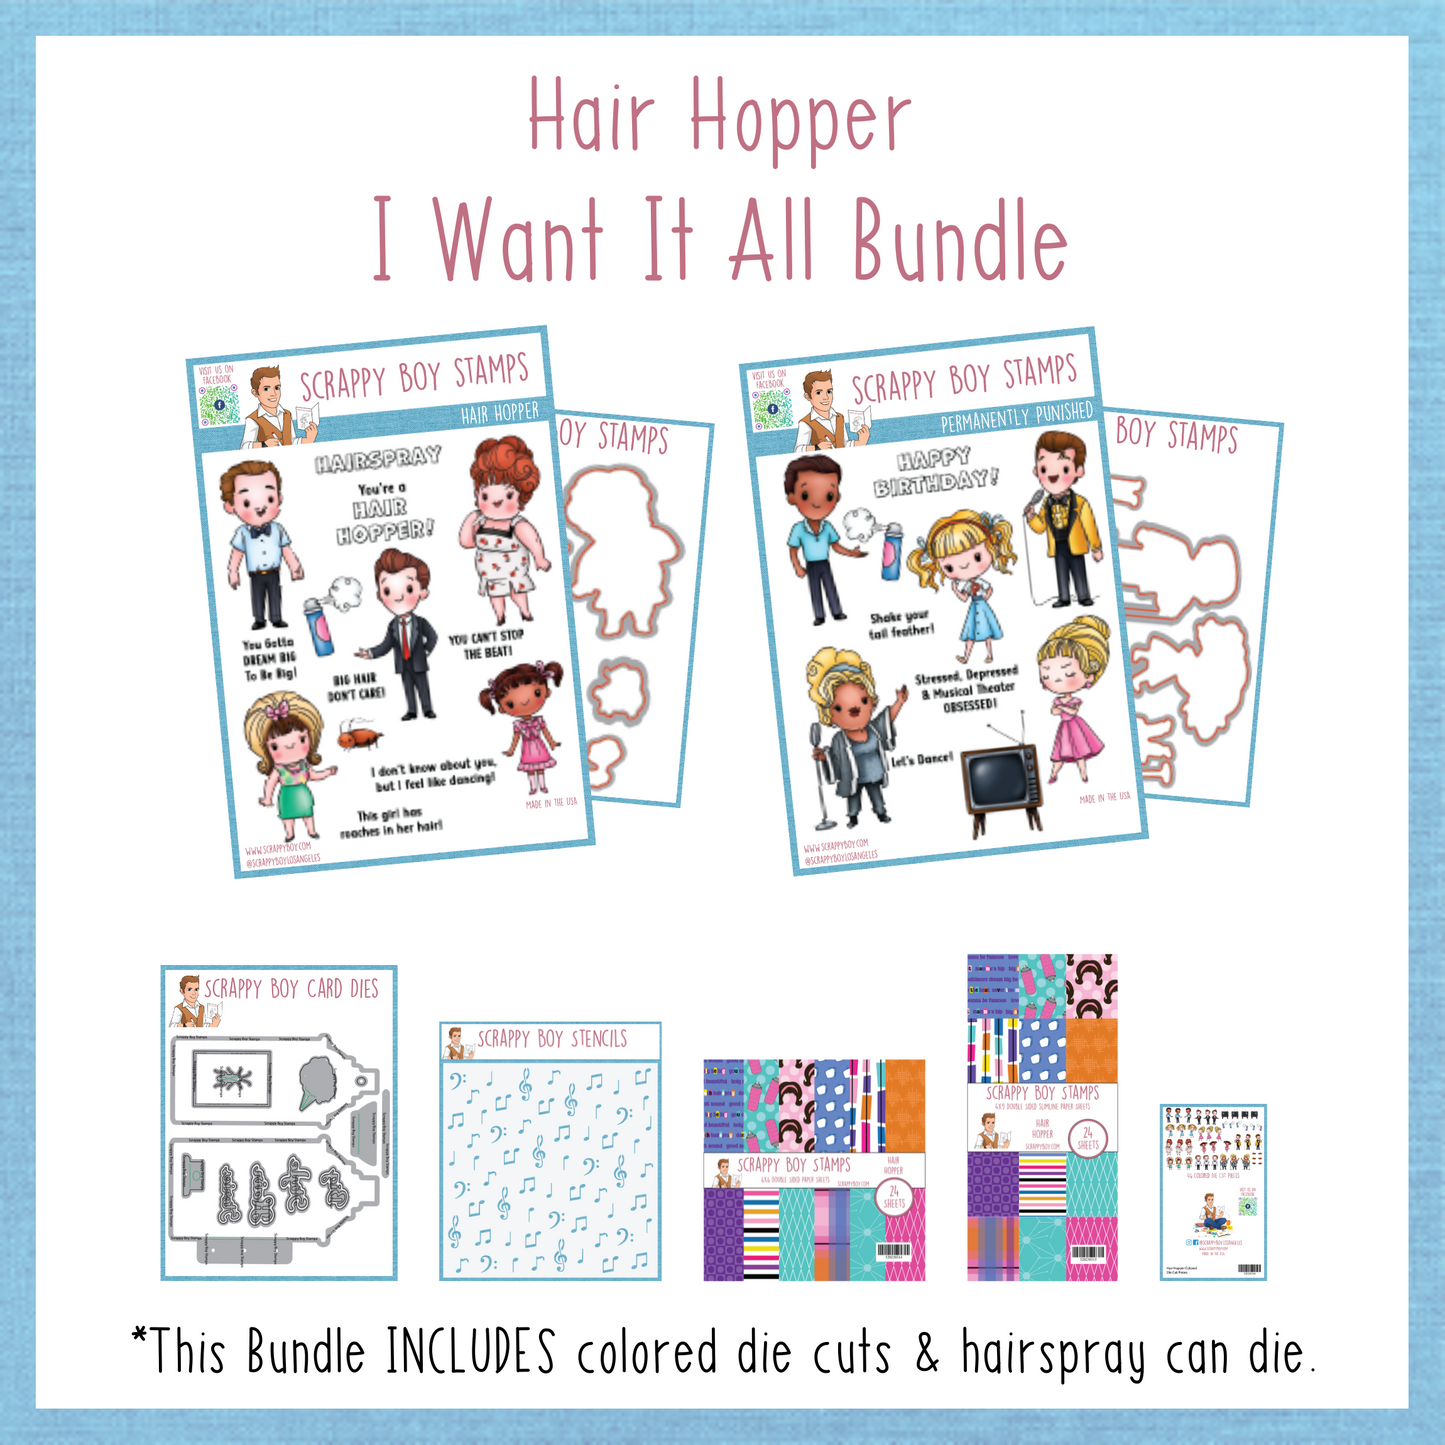 I Want It All Bundle - Hair Hopper Release Scrappy Boy Stamps